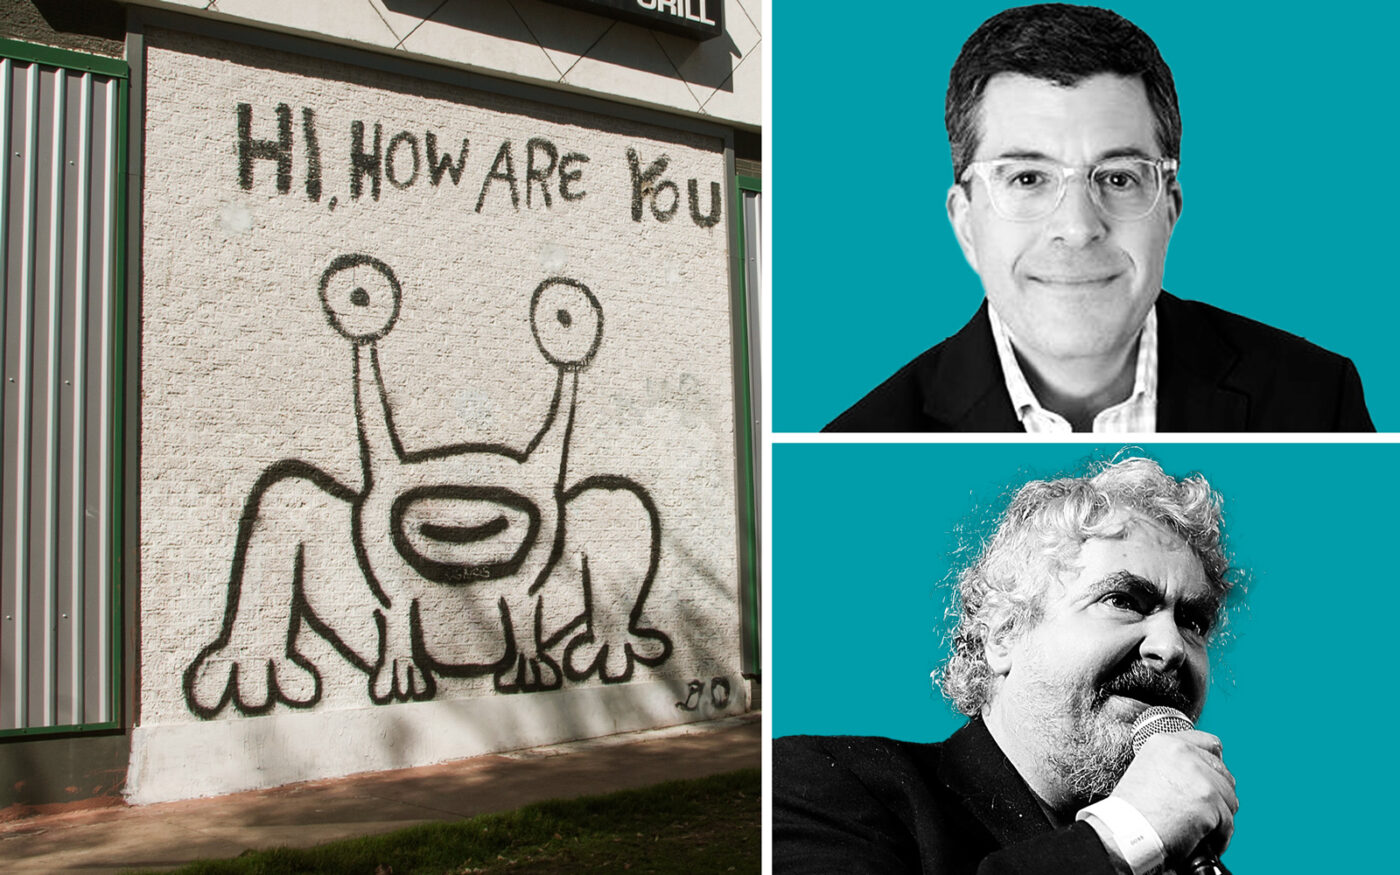 Daniel Johnston’s “Hi, How Are You” mural with American Campus Communities CEO Rob Palleschi and Daniel Johnston